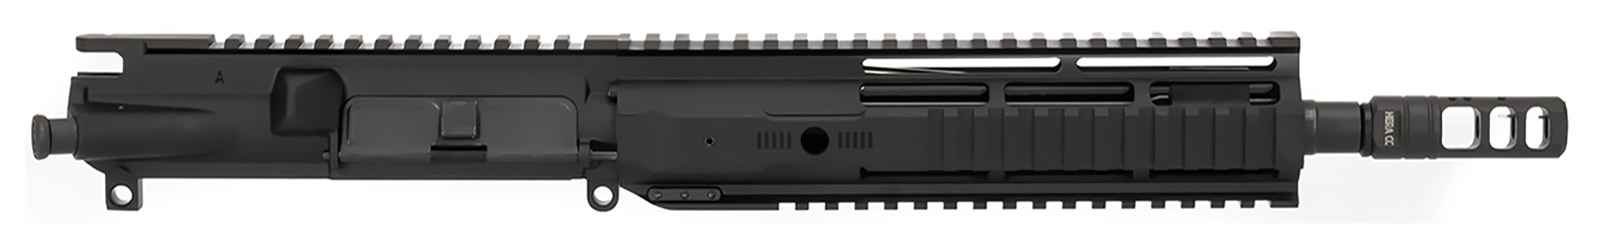 ar-15-upper-assembly-10-5-223-5-56-1-7-hera-competition-compensator-9-hera-arms-irs-handguard-rail